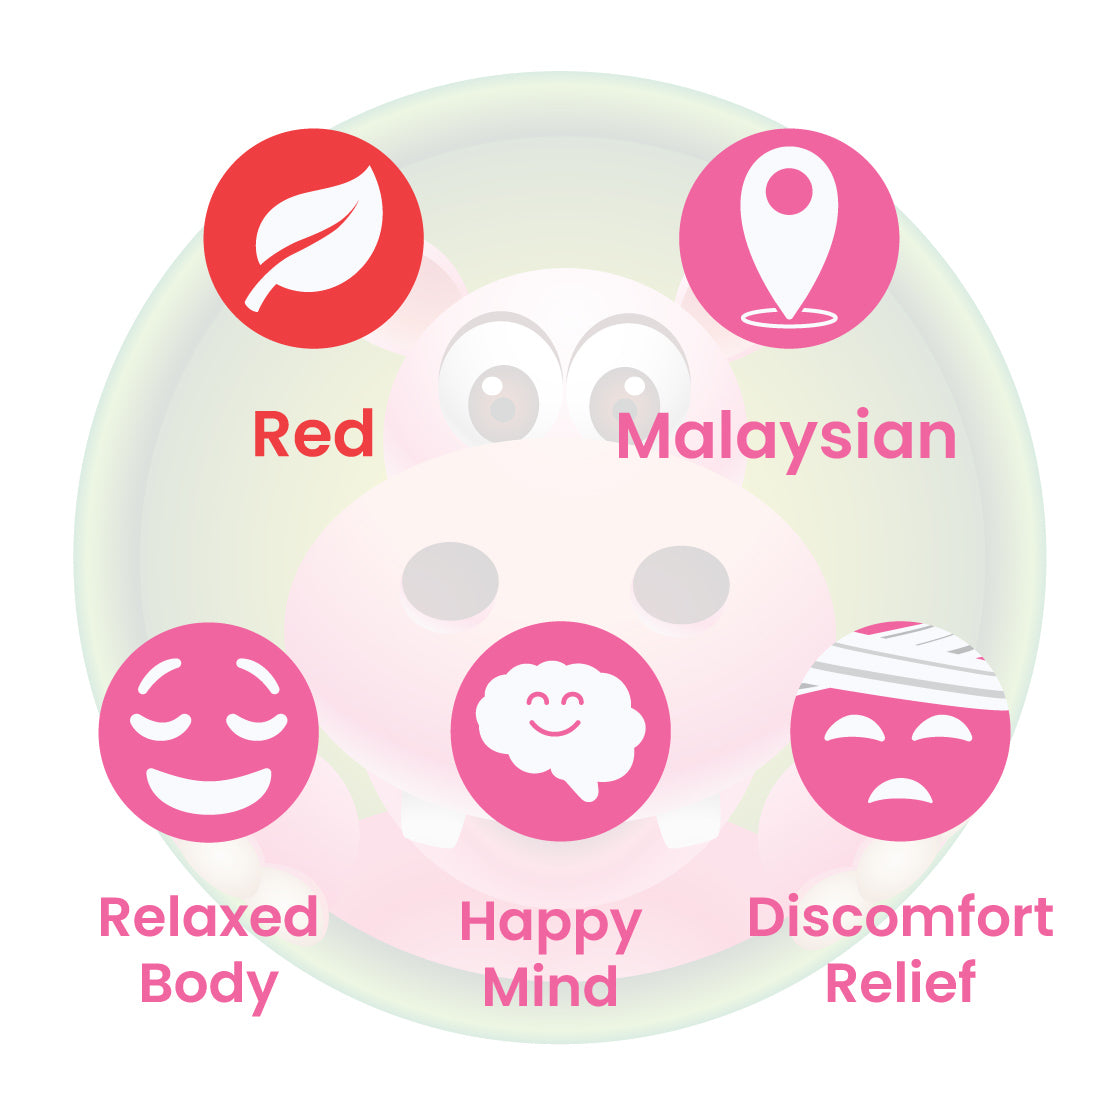 Infographic Details for Happy Hippo Red Vein Malay Kratom Powder. Leaf color: Red Vein. Kratom Strain Origin: Malaysian. Kratom Effects resonate with Happy Mind, Relaxed Body, and Relief from Physical Discomfort.